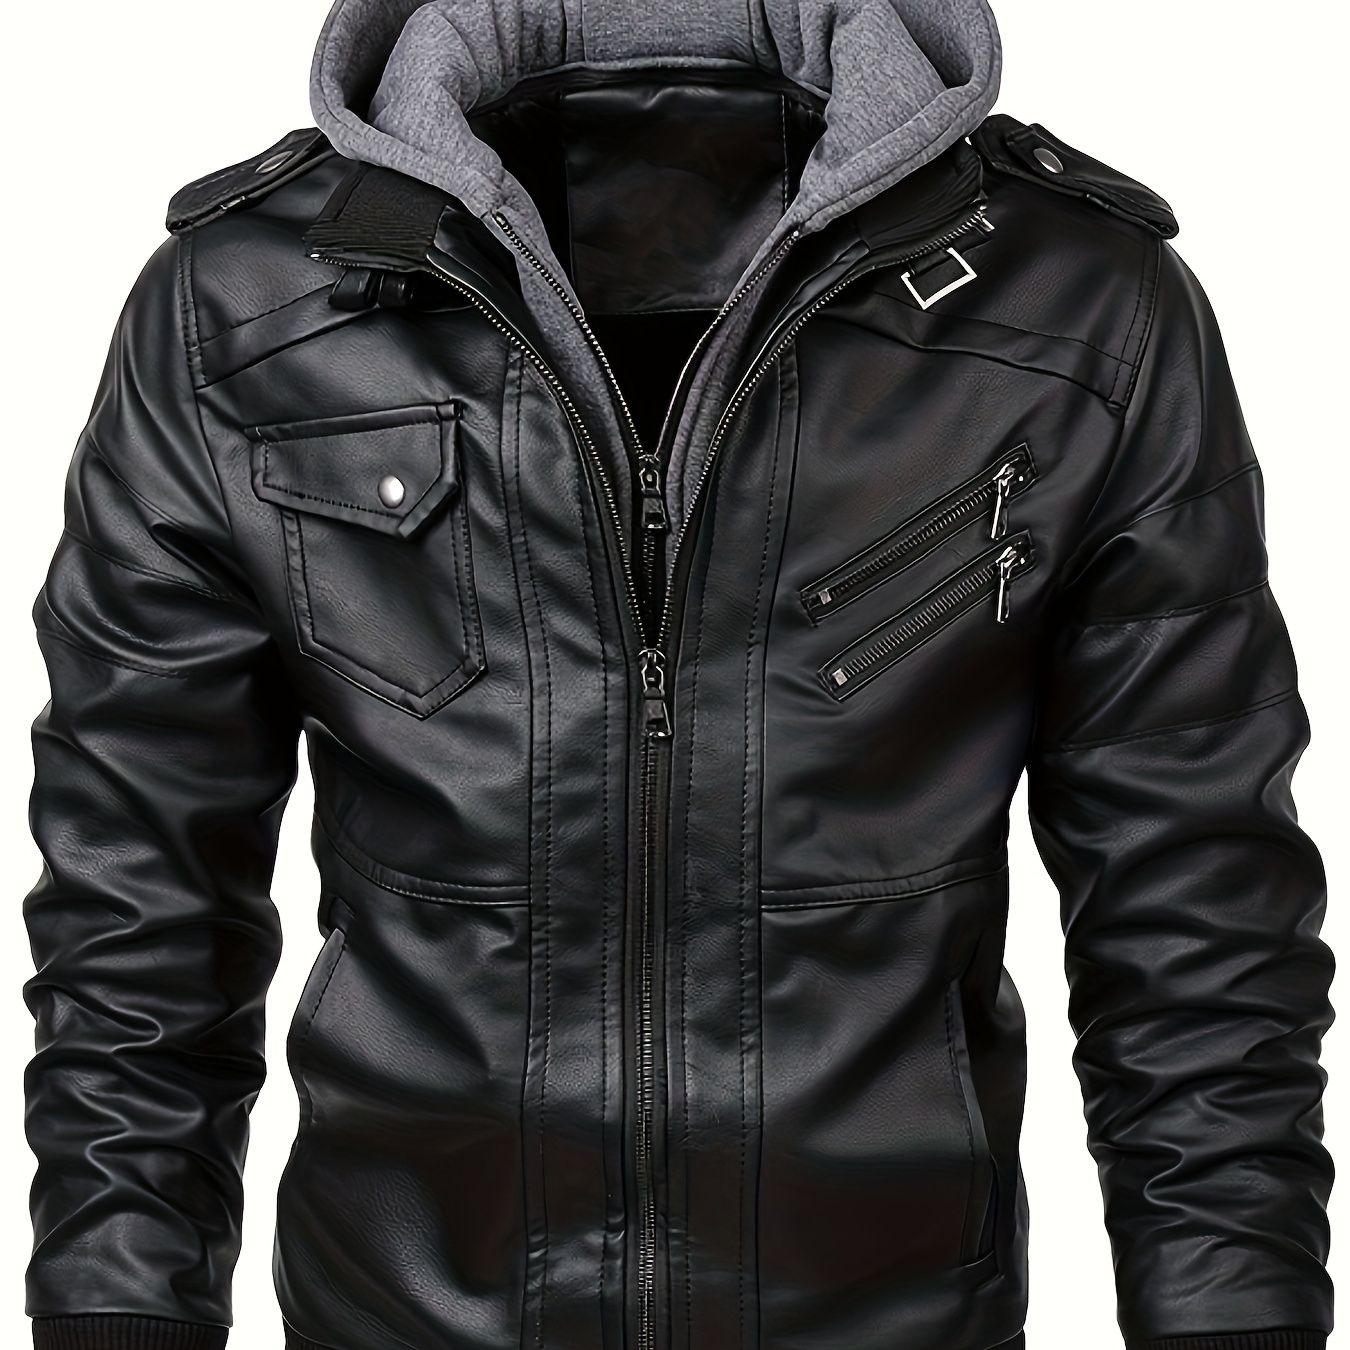 

Men's Pu Leather Jacket With Pockets, Casual Zip Up Long Sleeve Hooded Jacket For Outdoor